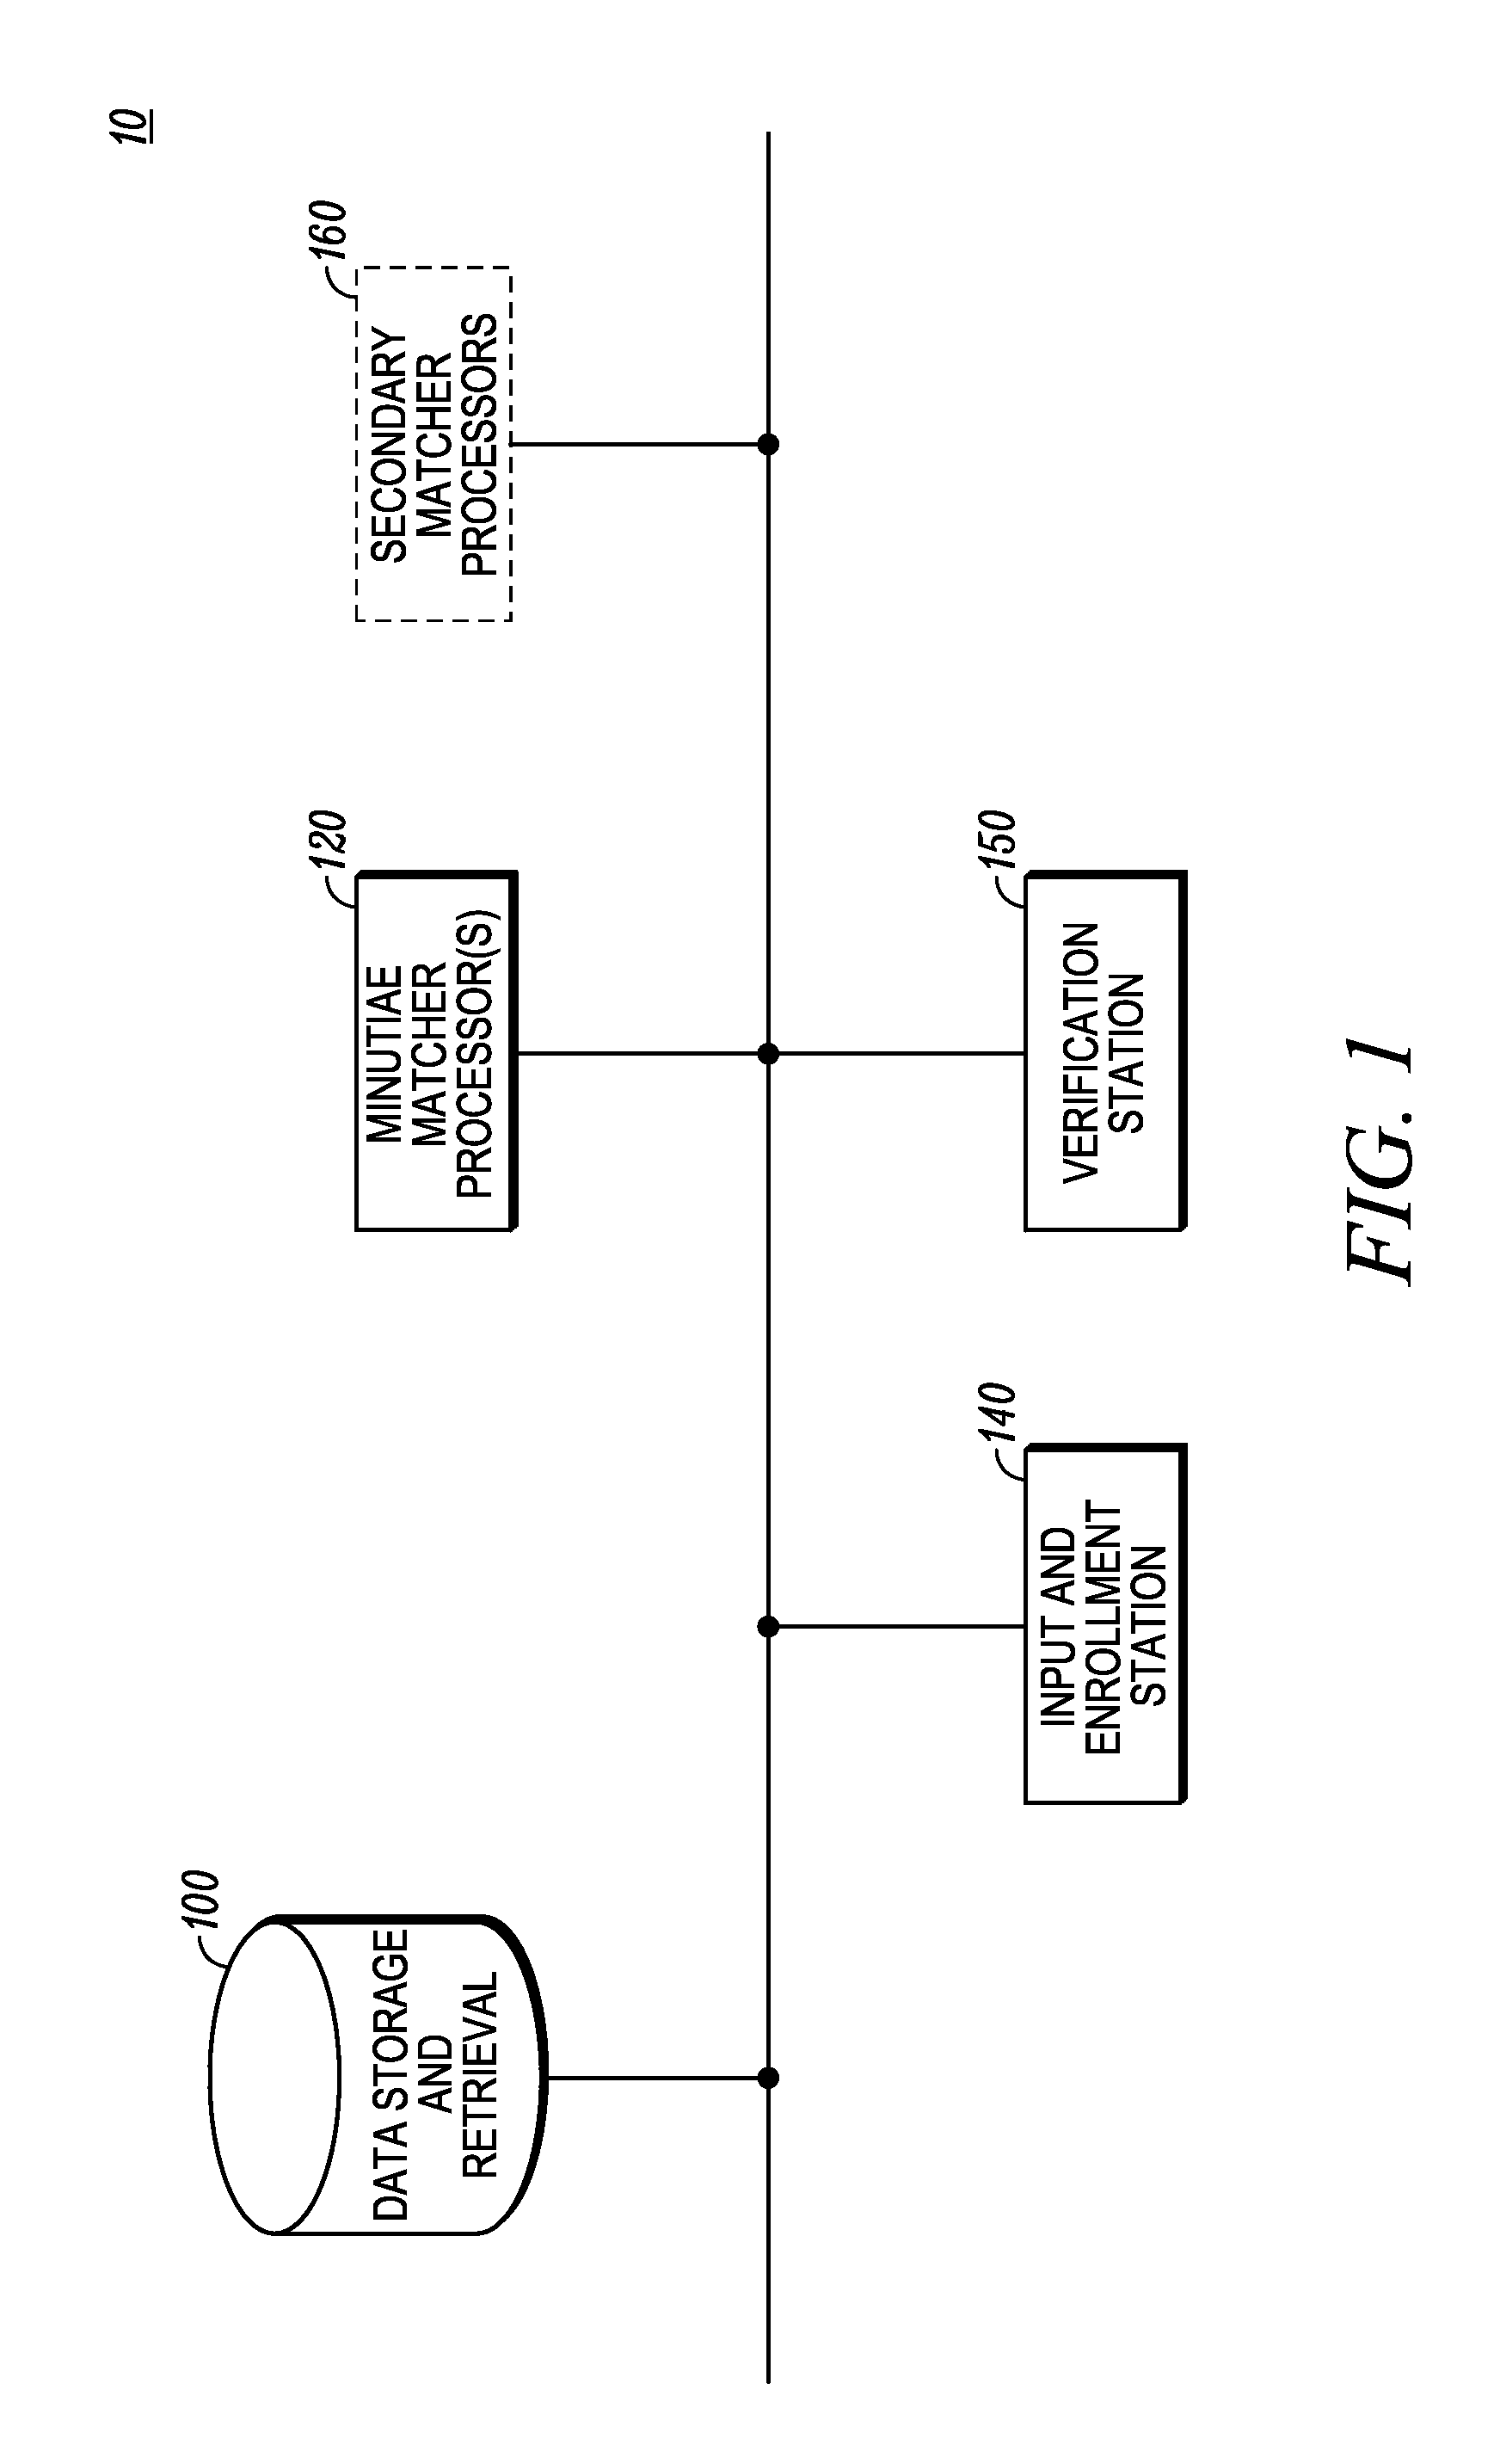 Methods for gray-level ridge feature extraction and associated print matching